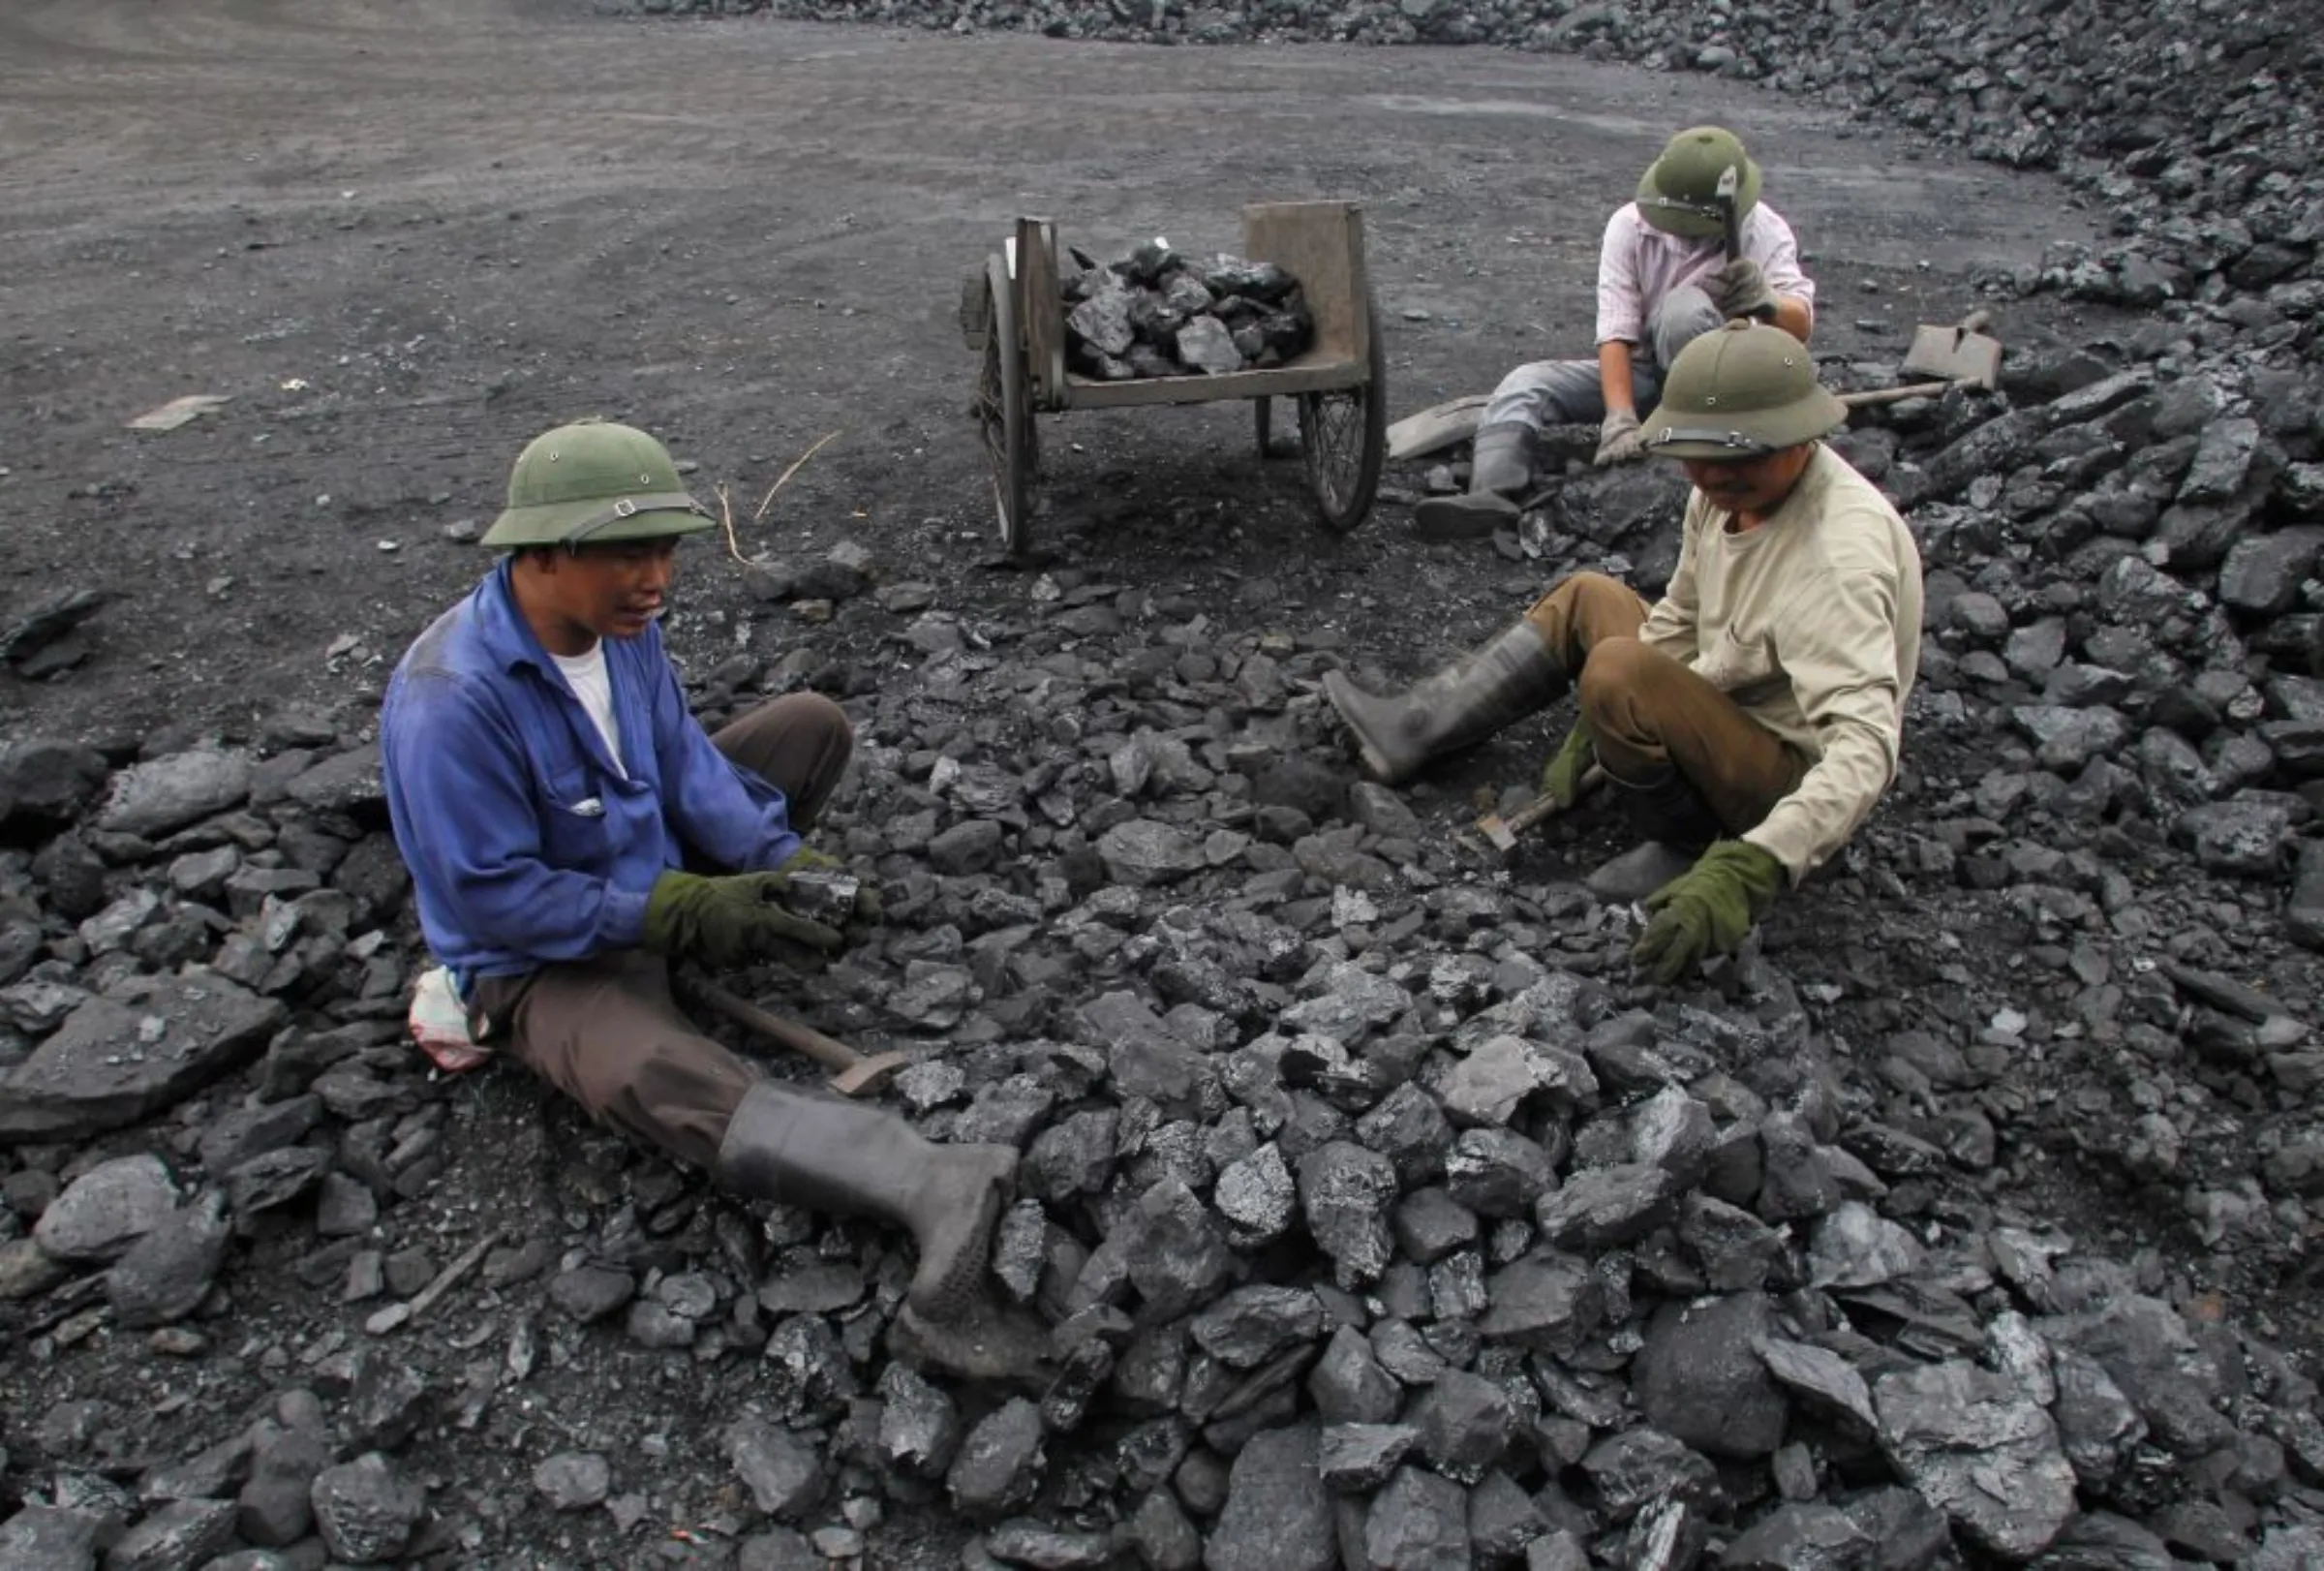 Workers pick out gravel from coal at a coal port in Hanoi February 23, 2012